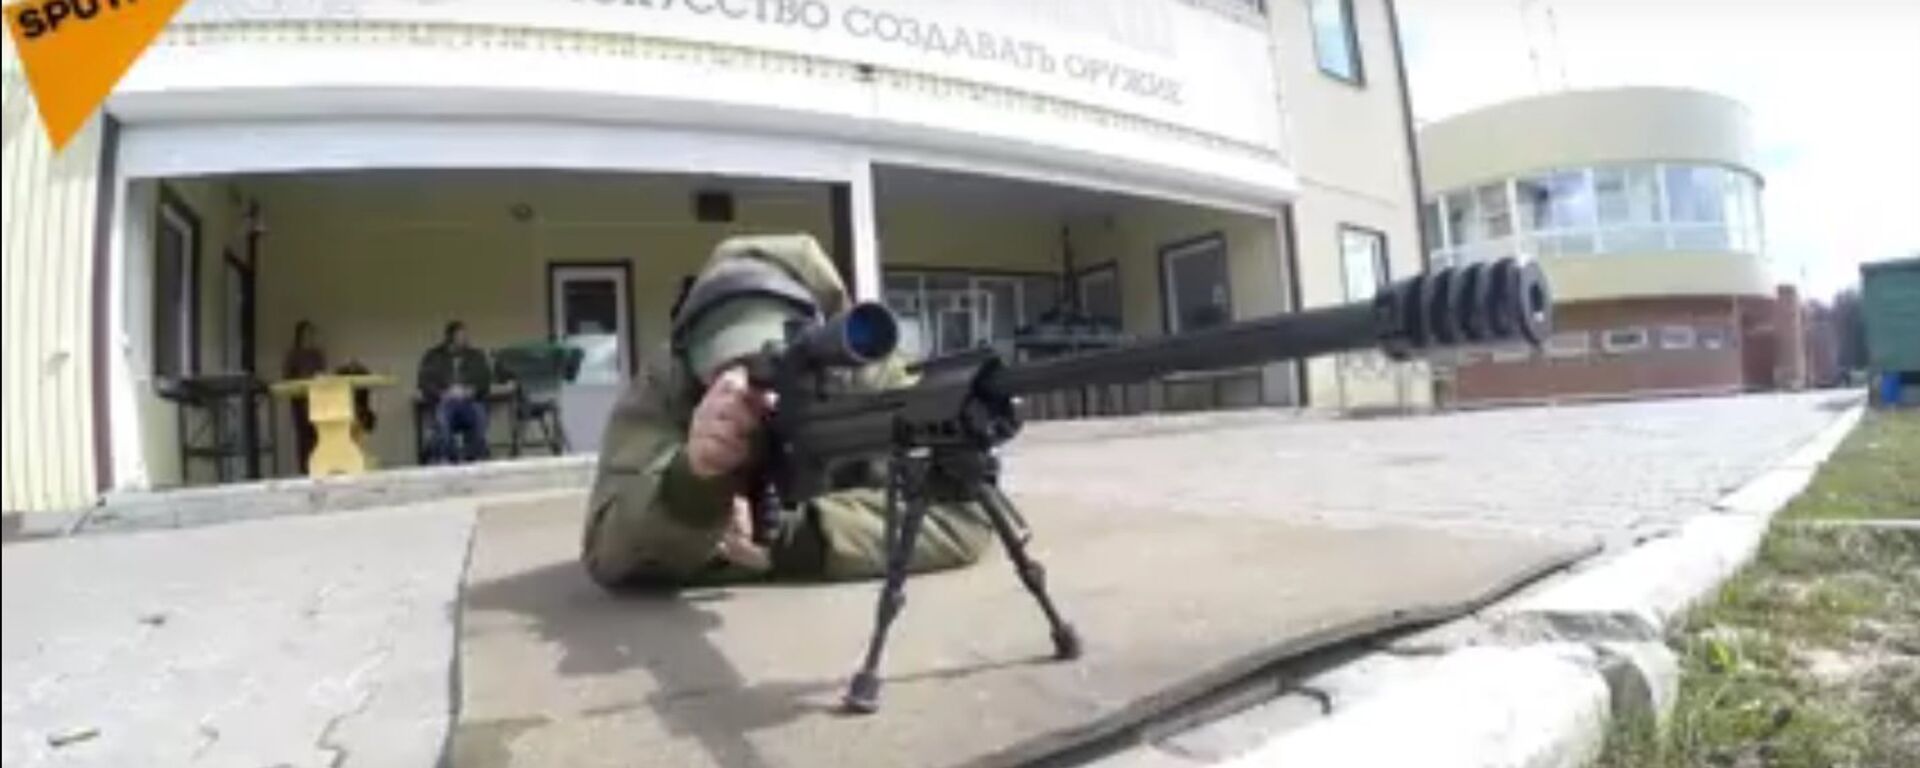 T-5000 Sniper Rifle Tested In The Moscow Region - اسپوتنیک افغانستان  , 1920, 07.06.2017